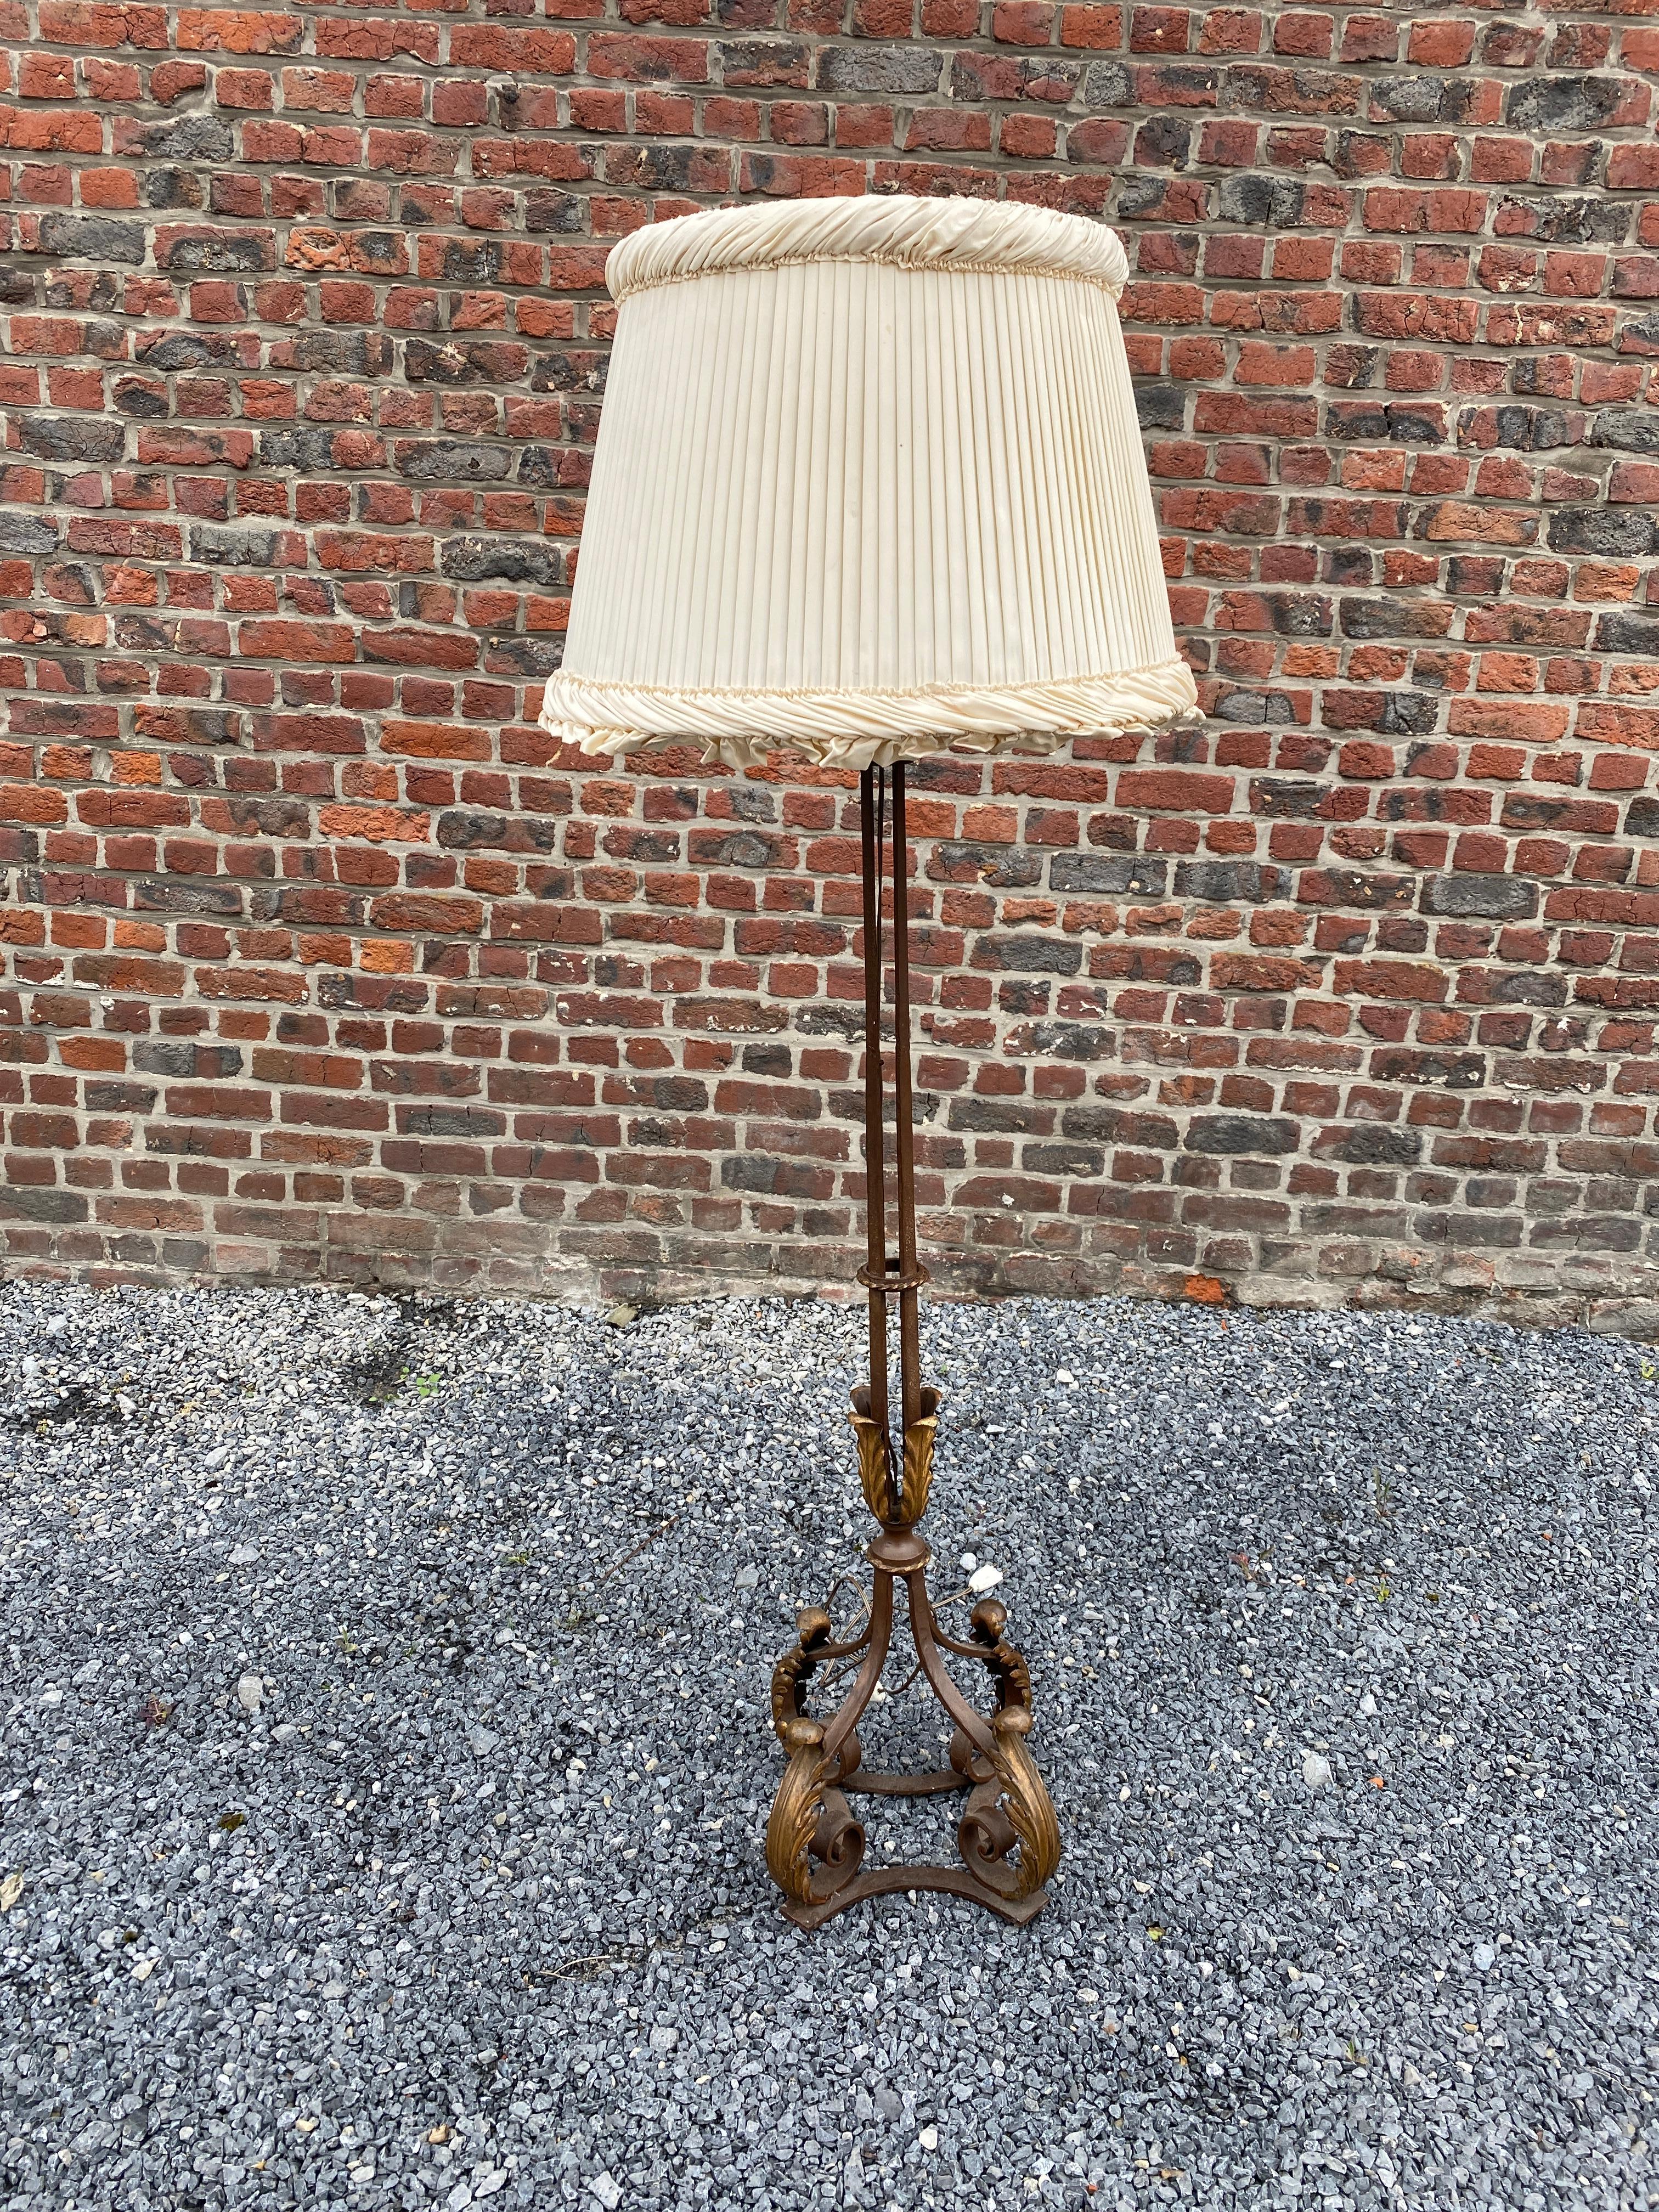 Art Deco floor lamp in the style of Gilbert Poillerat, circa 1940.
The lamp shade is in poor condition.